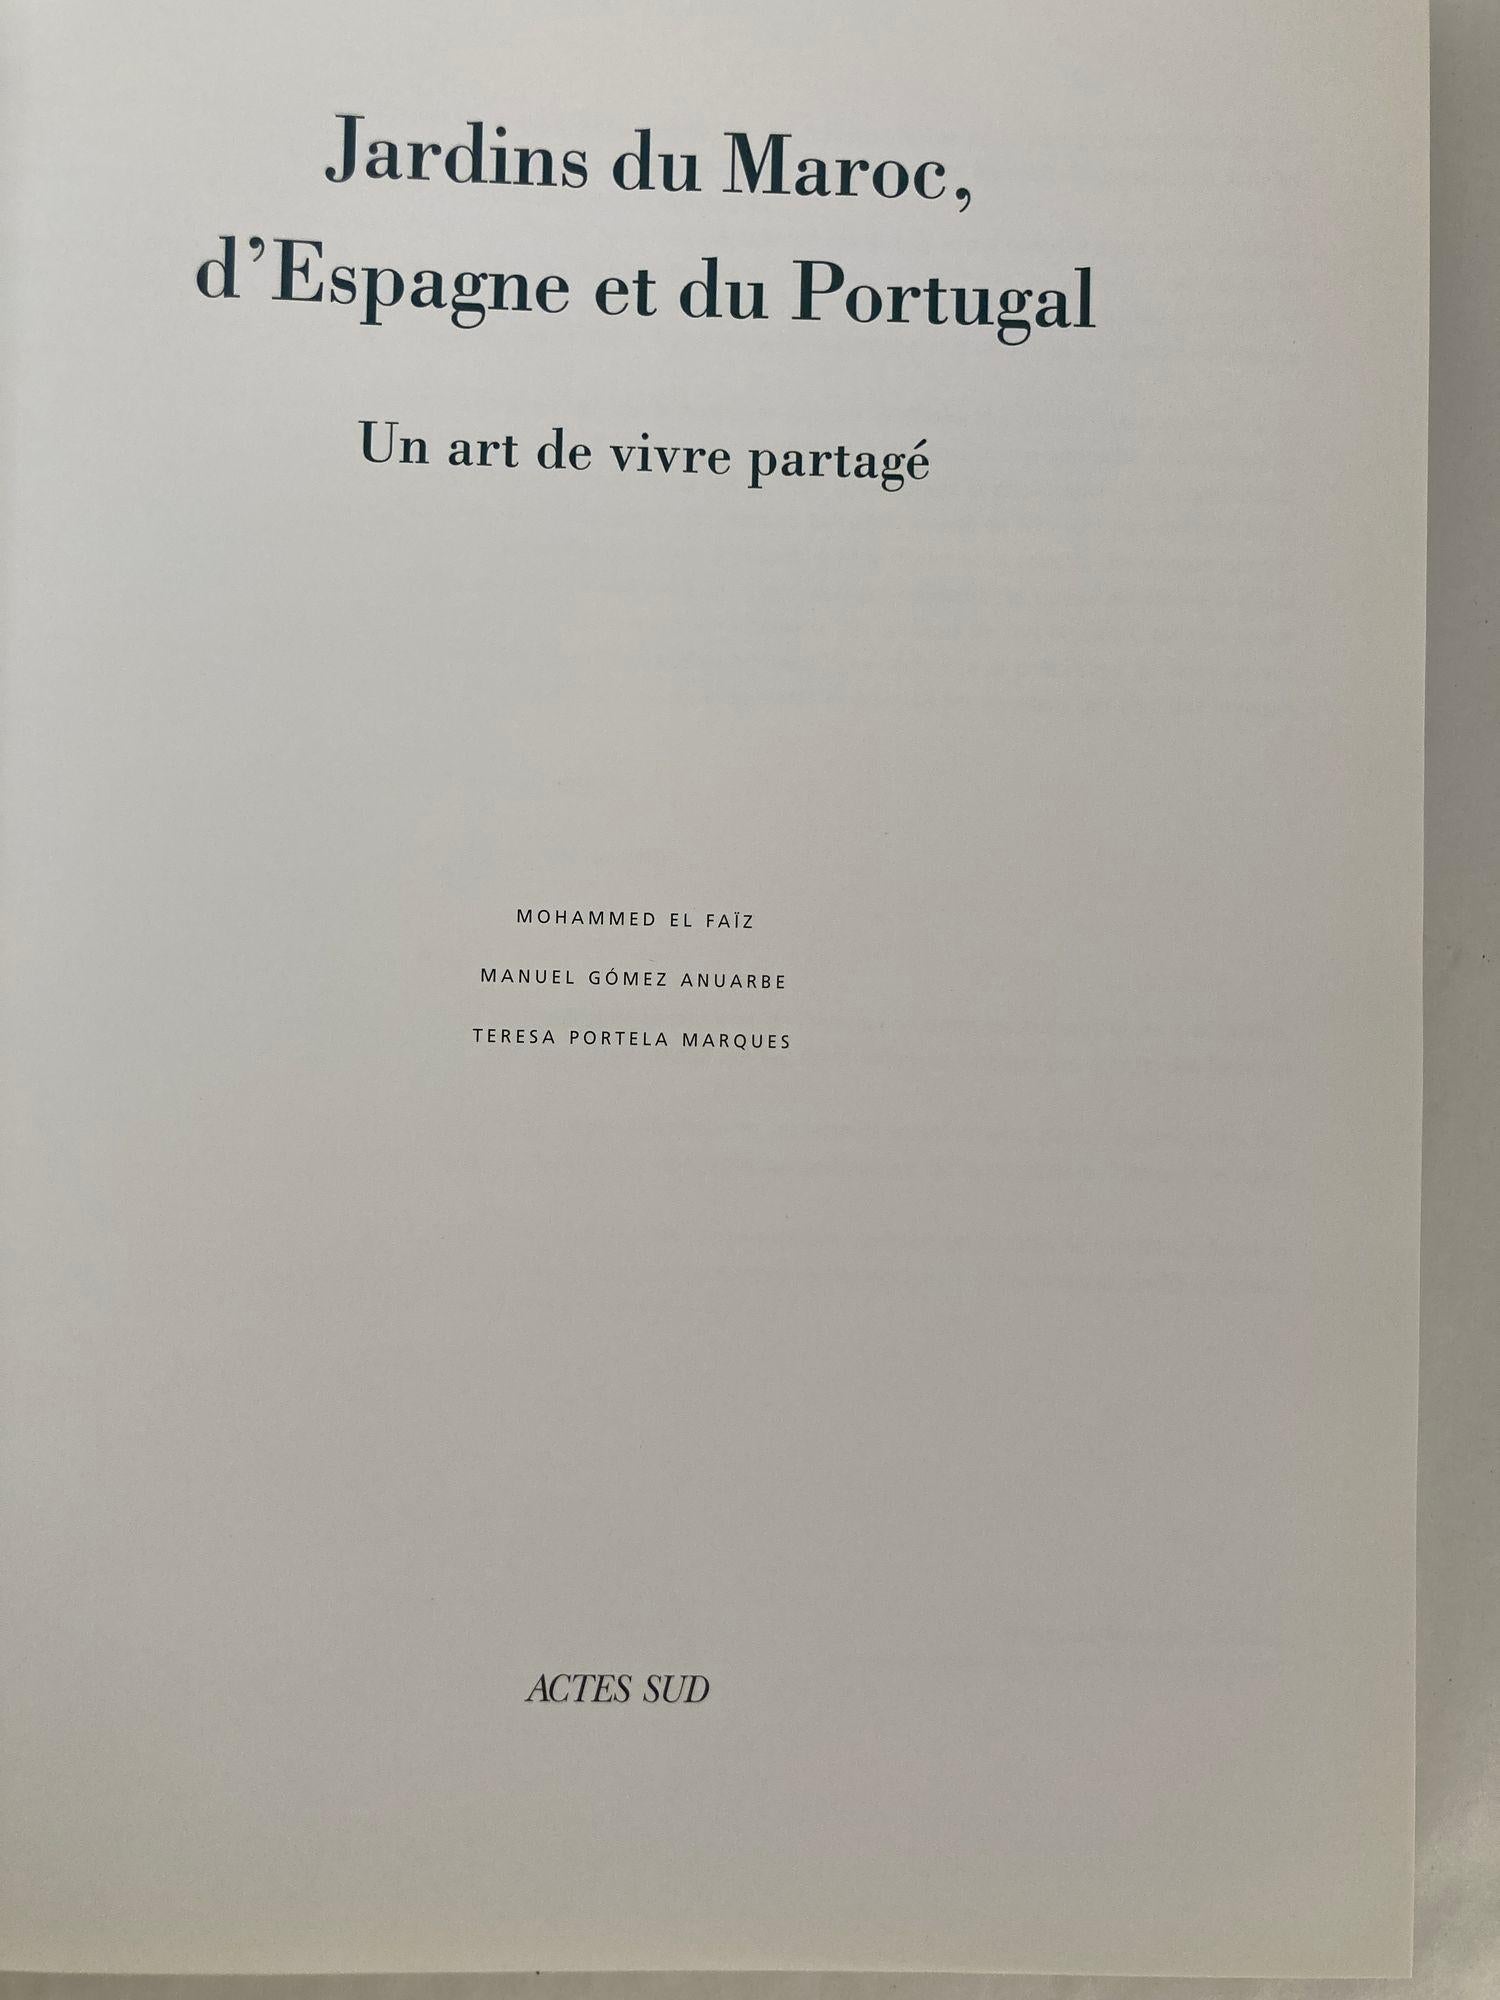 Garden of Morocco, Spain and Portugal Hardcover Book French Ed. For Sale 4